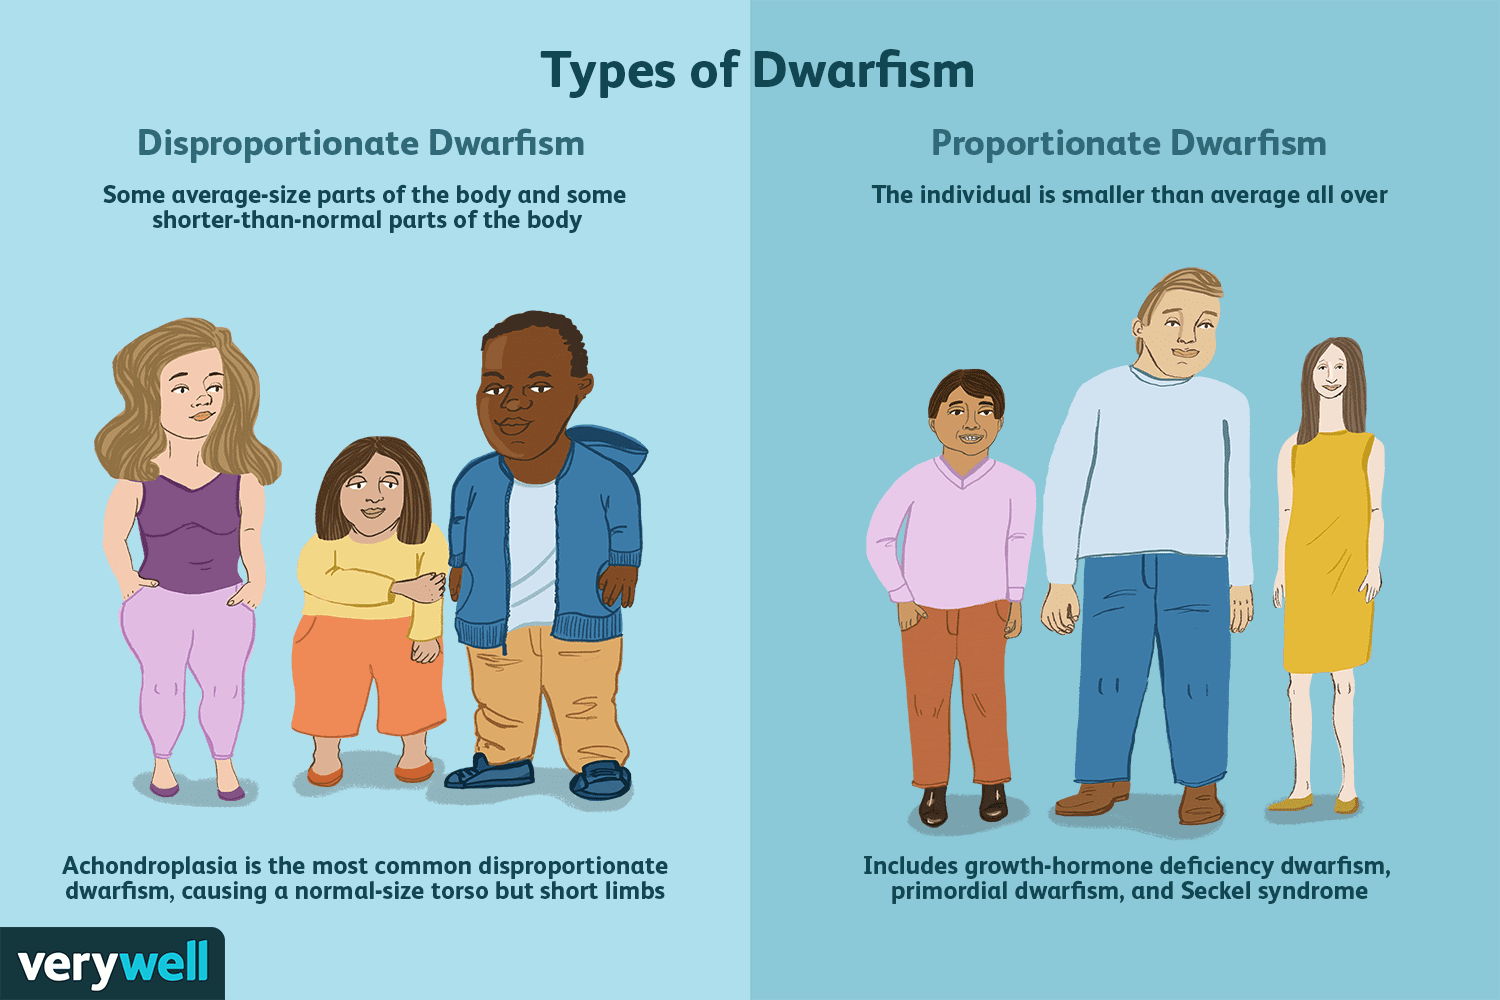 What are the causes of proportionate dwarfism?